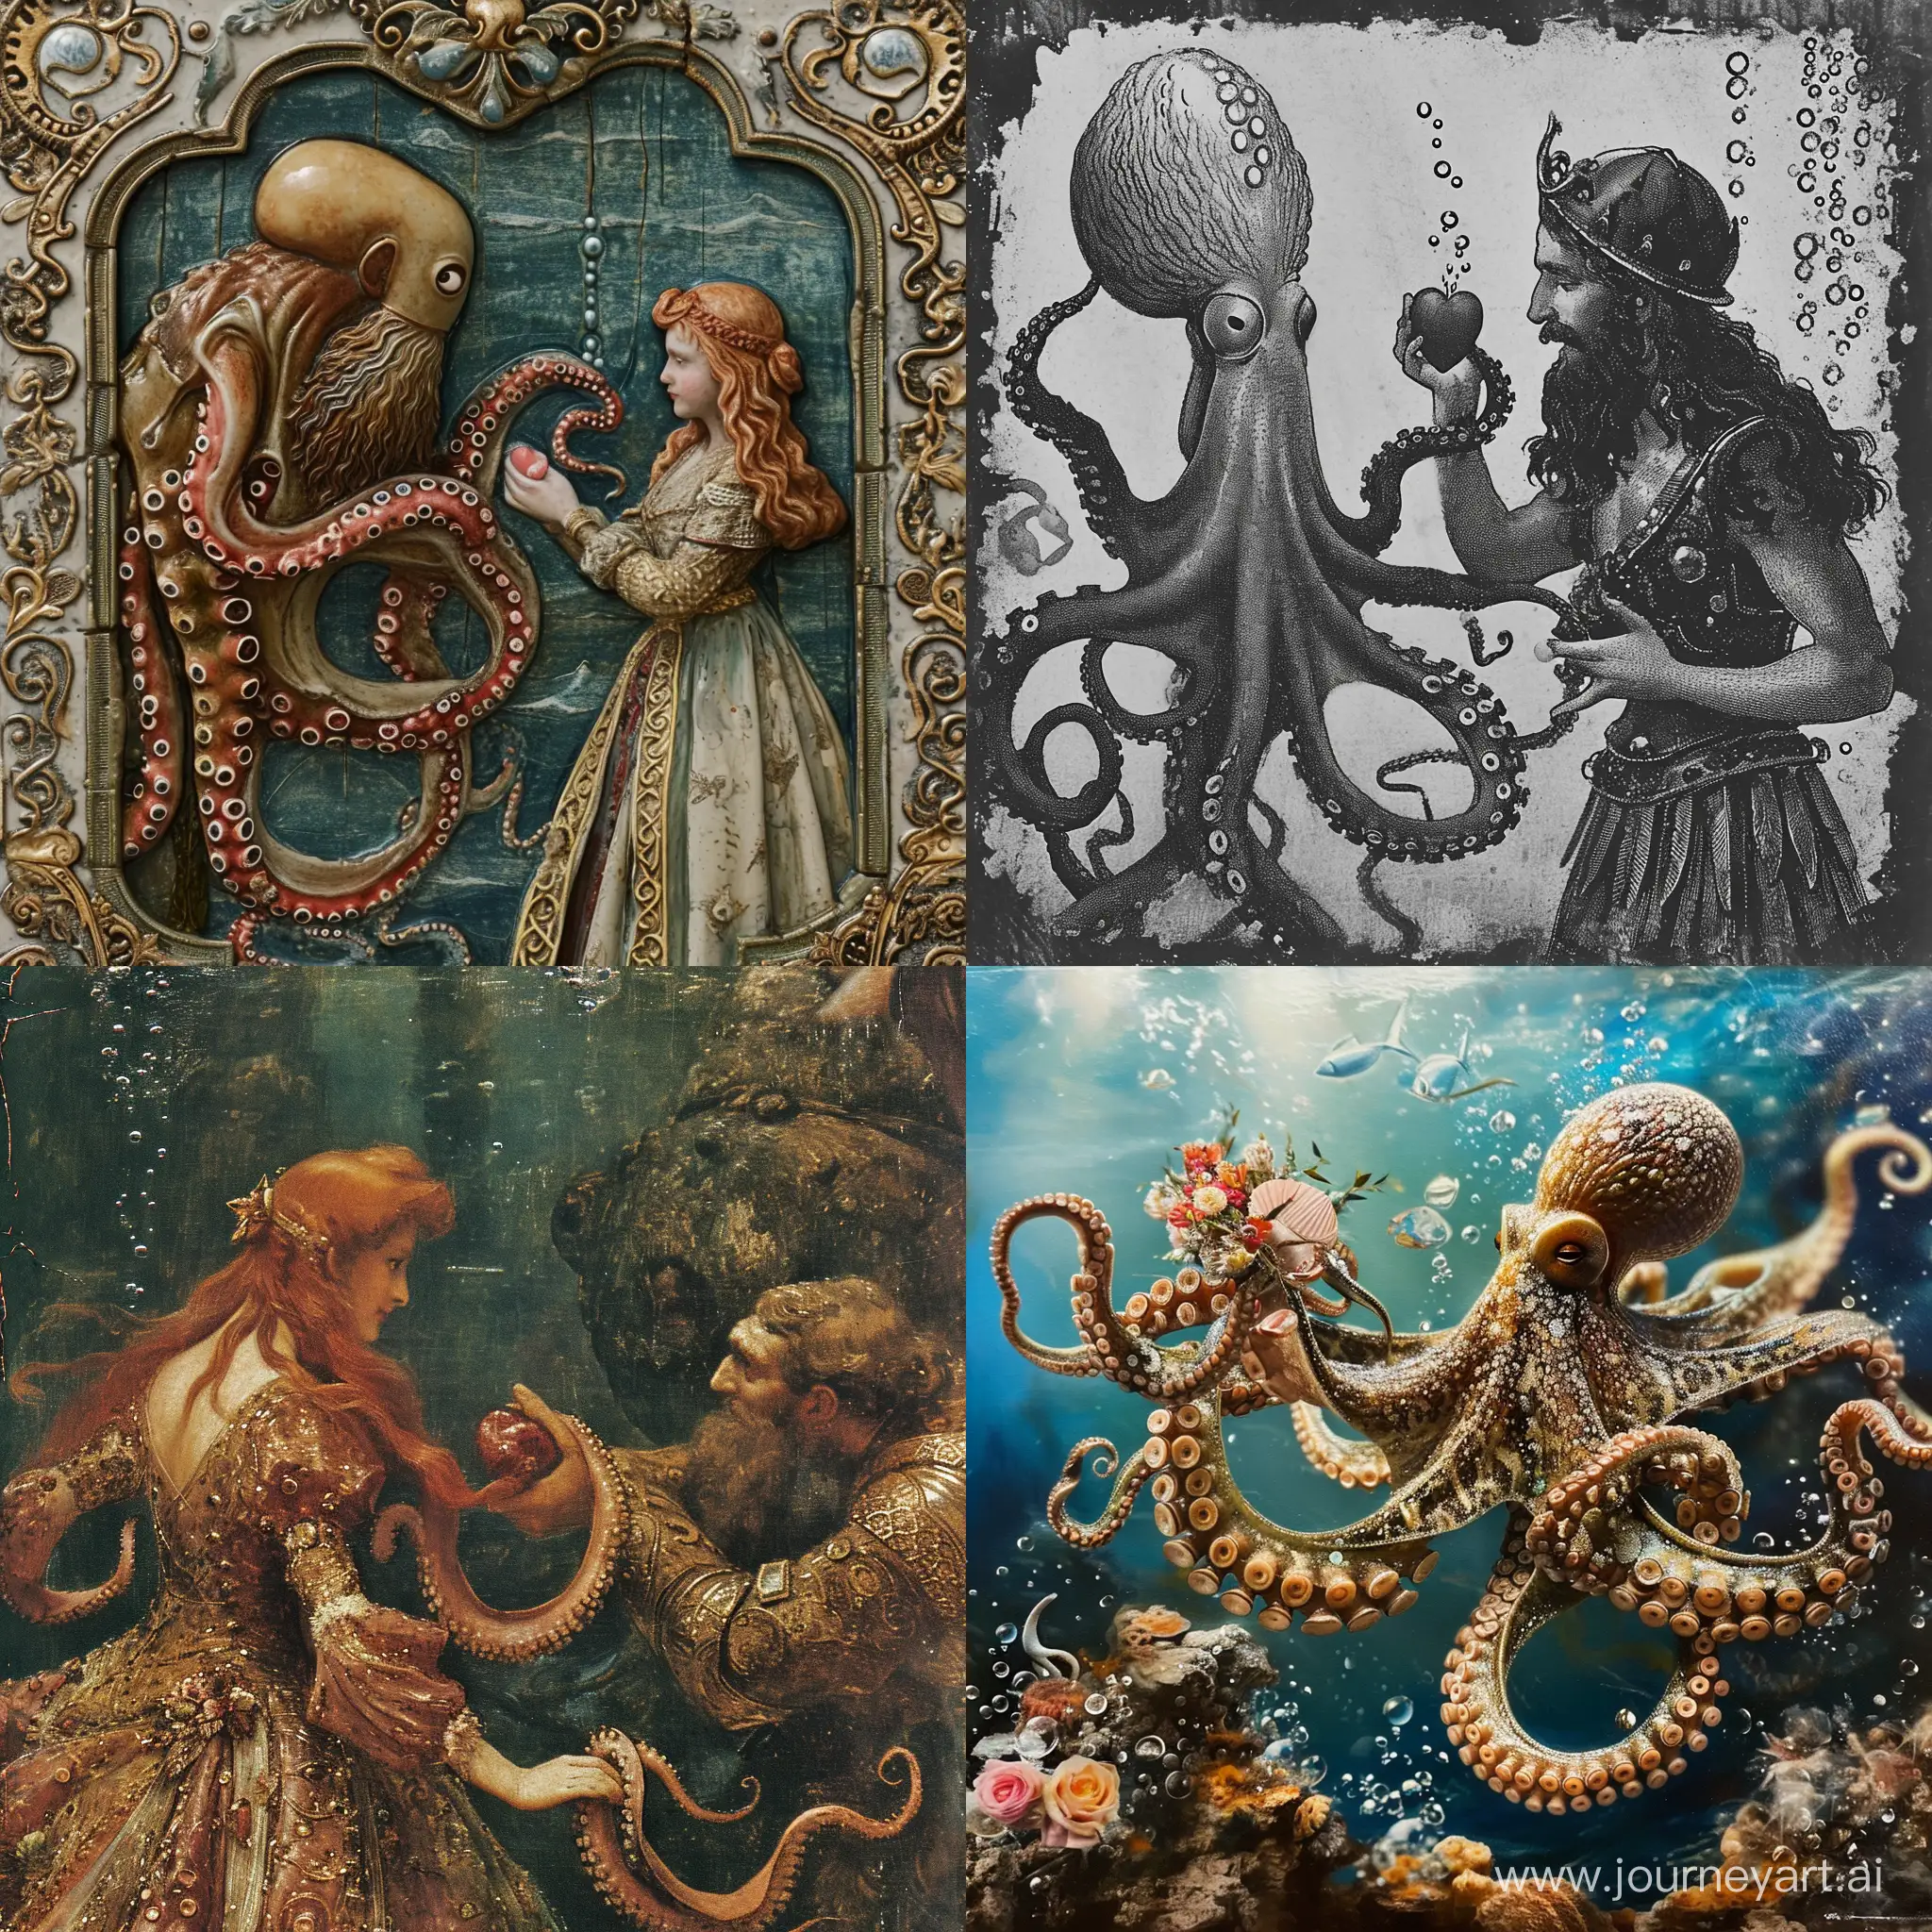 Octopus-Seeks-Blessing-from-King-Poseidon-for-Royal-Union